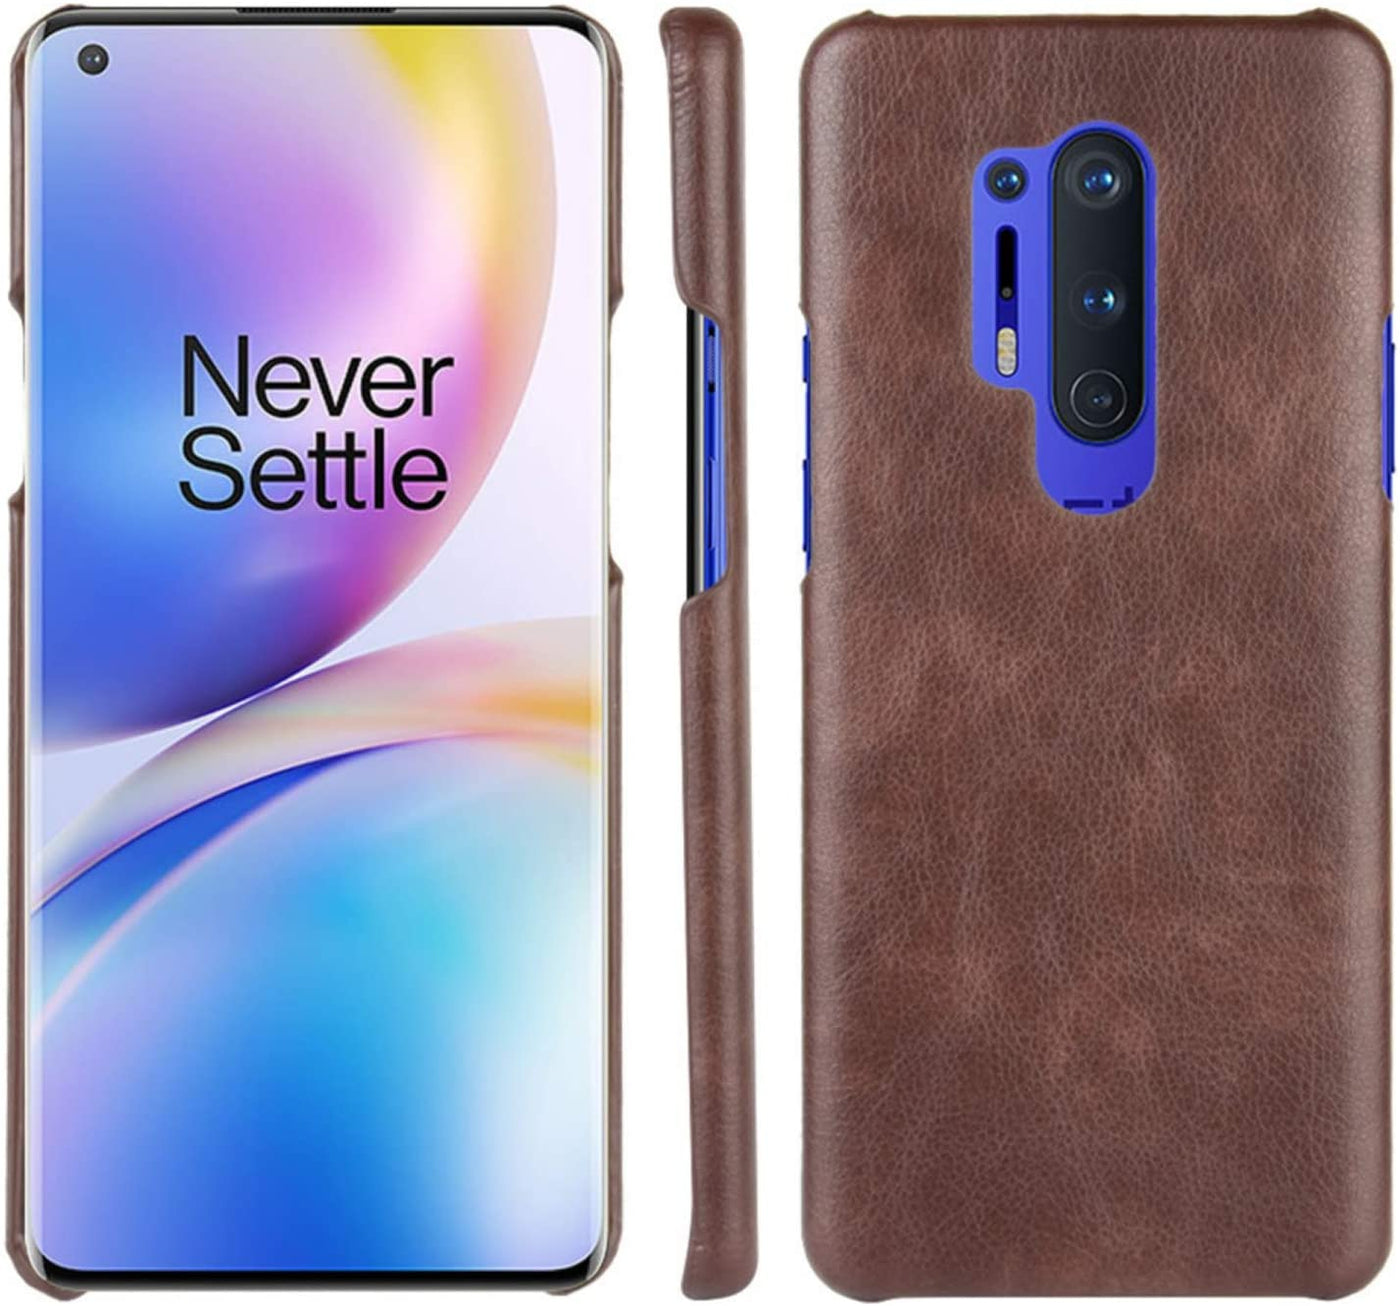 Oneplus 8 Pro coffee color hard back cover case